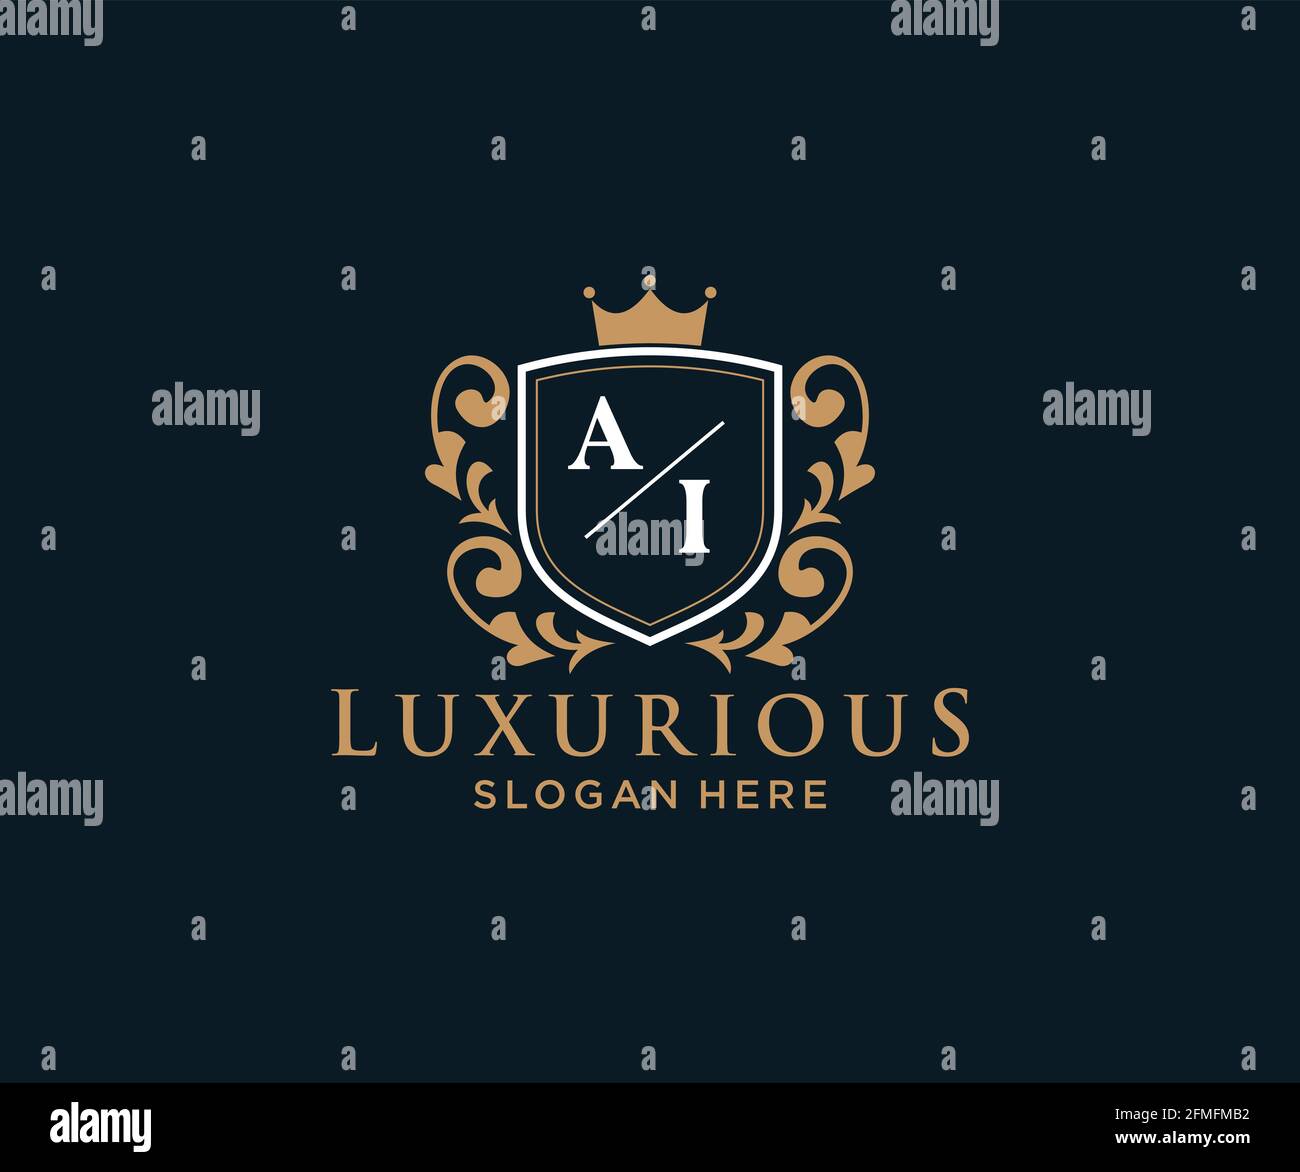 AI Letter Royal Luxury Logo template in vector art for Restaurant, Royalty, Boutique, Cafe, Hotel, Heraldic, Jewelry, Fashion and other vector illustr Stock Vector